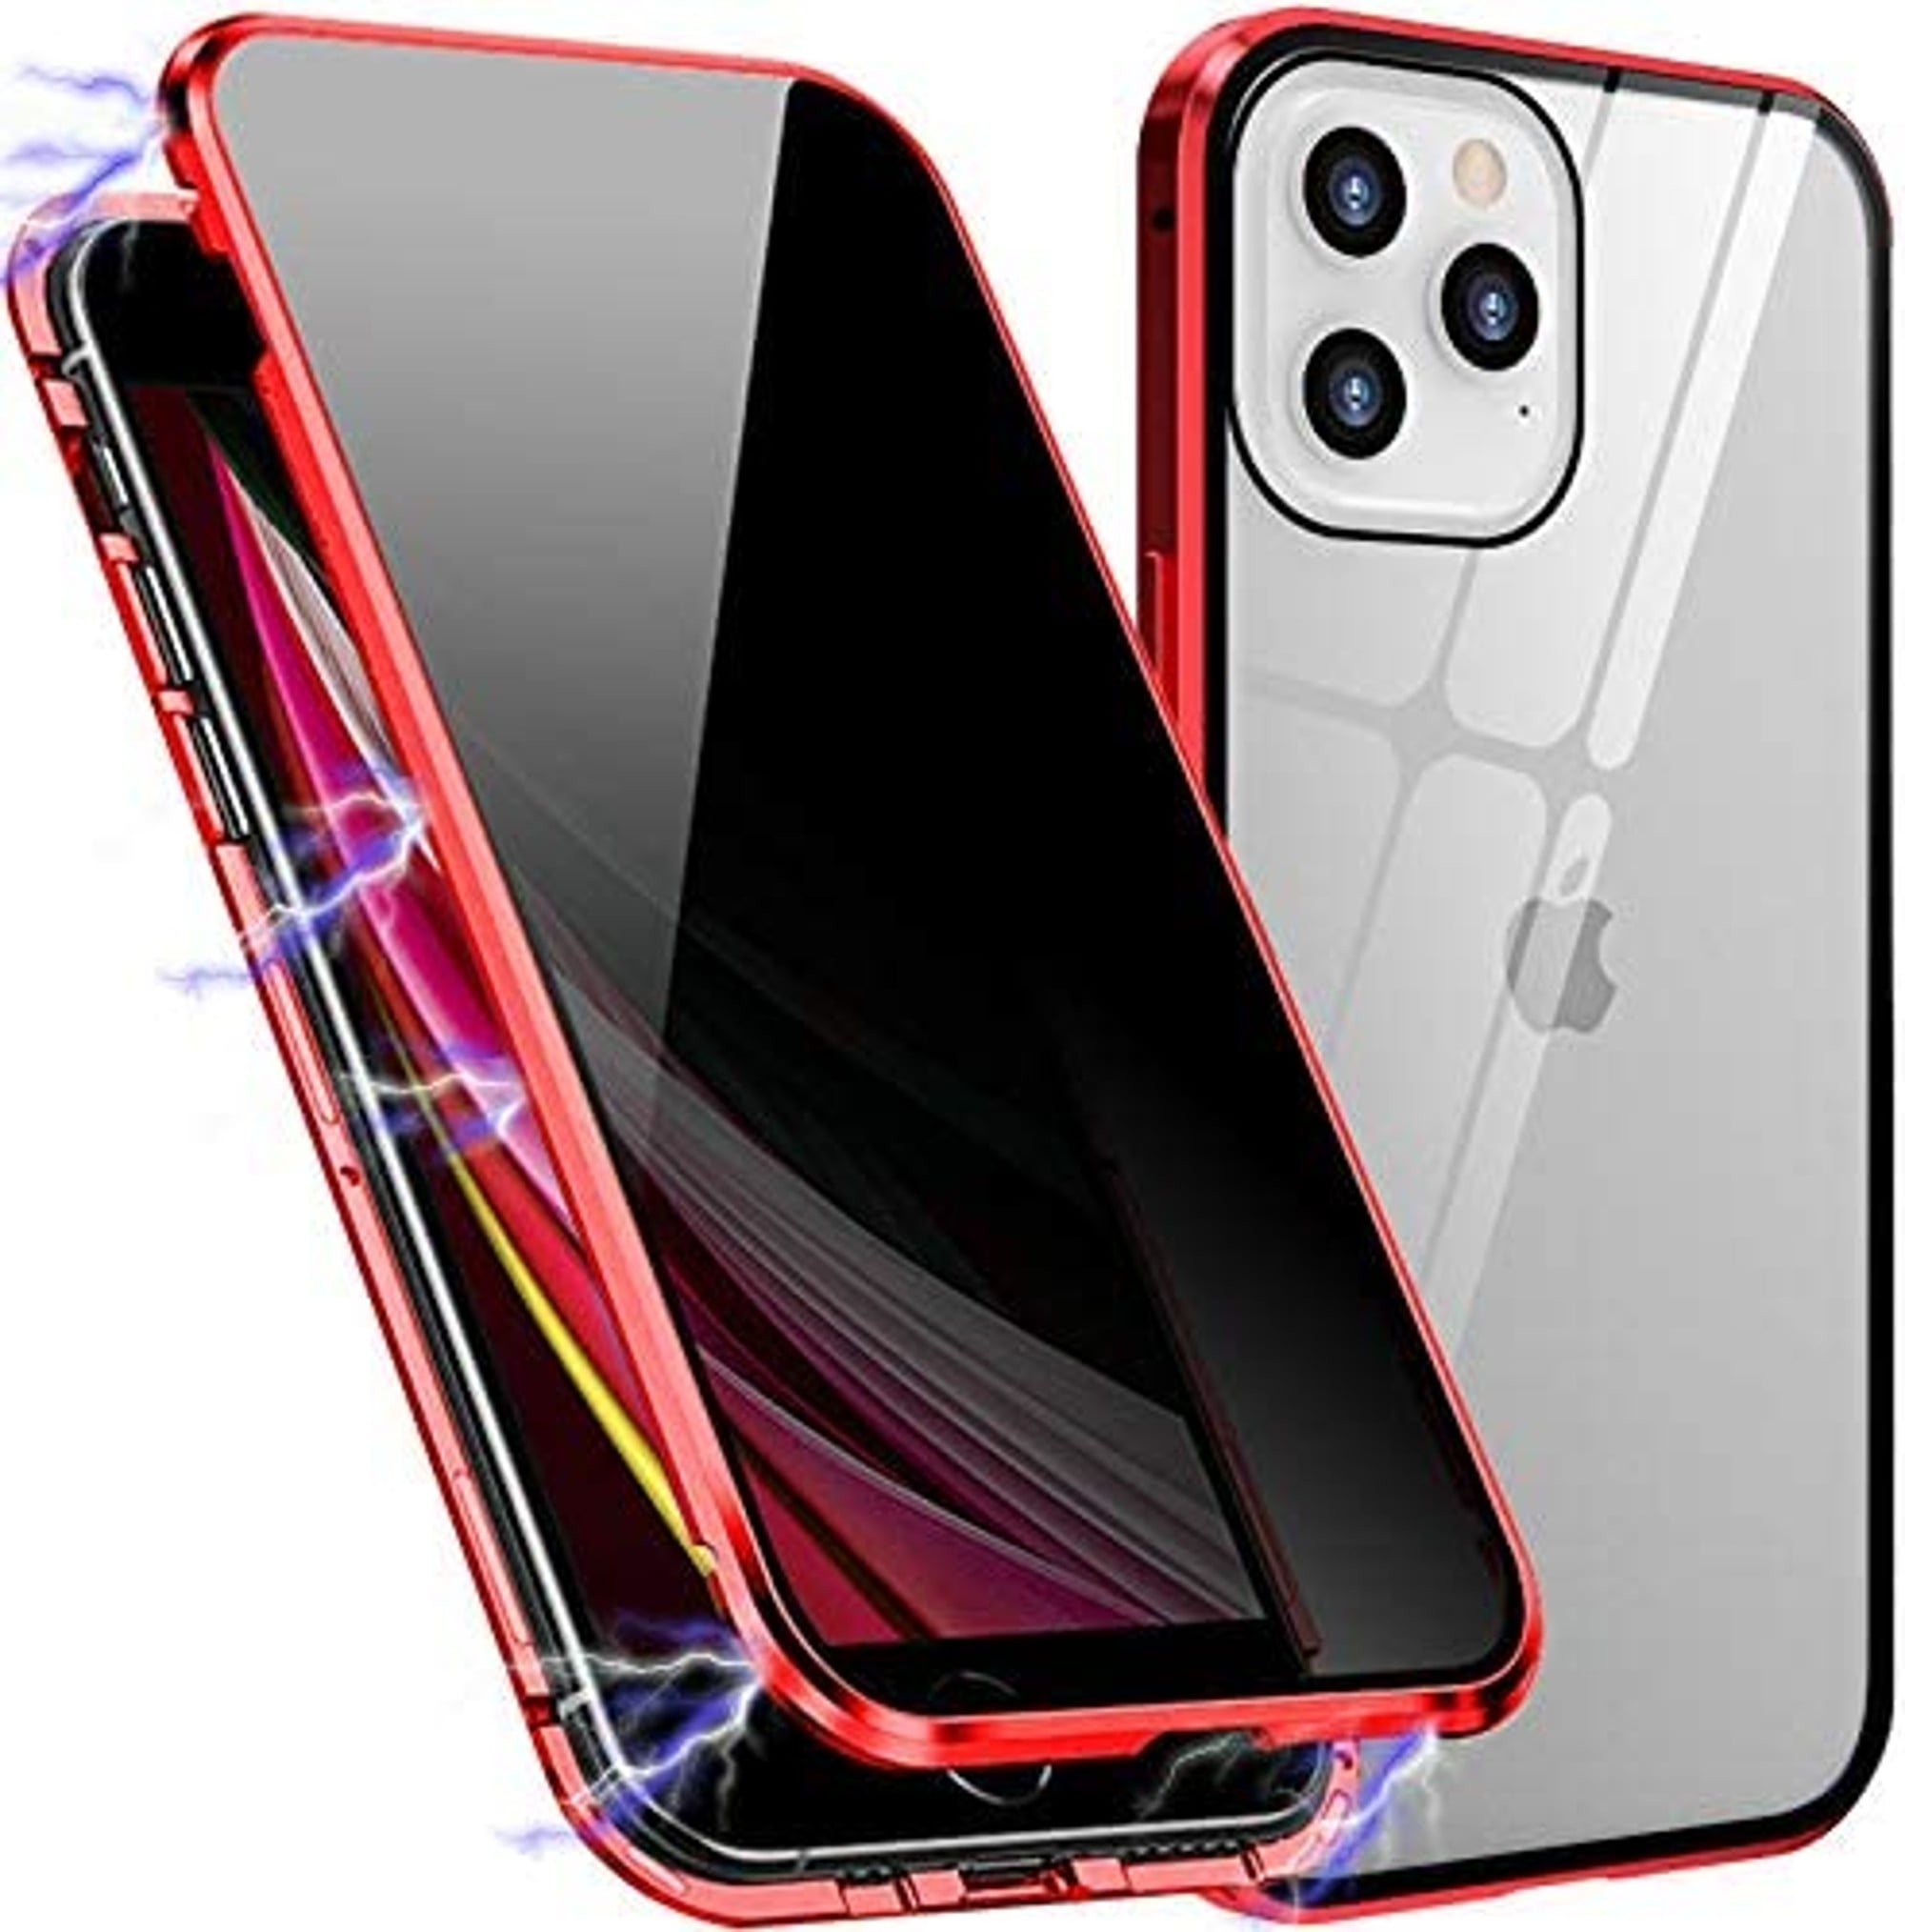 Eller Løve byld Anti Peep Magnetic iPhone 13 Case (Red) Double Sided Privacy Tempered Glass  Screen Protector Shockproof and Scratch Resistant Protection - Walmart.com